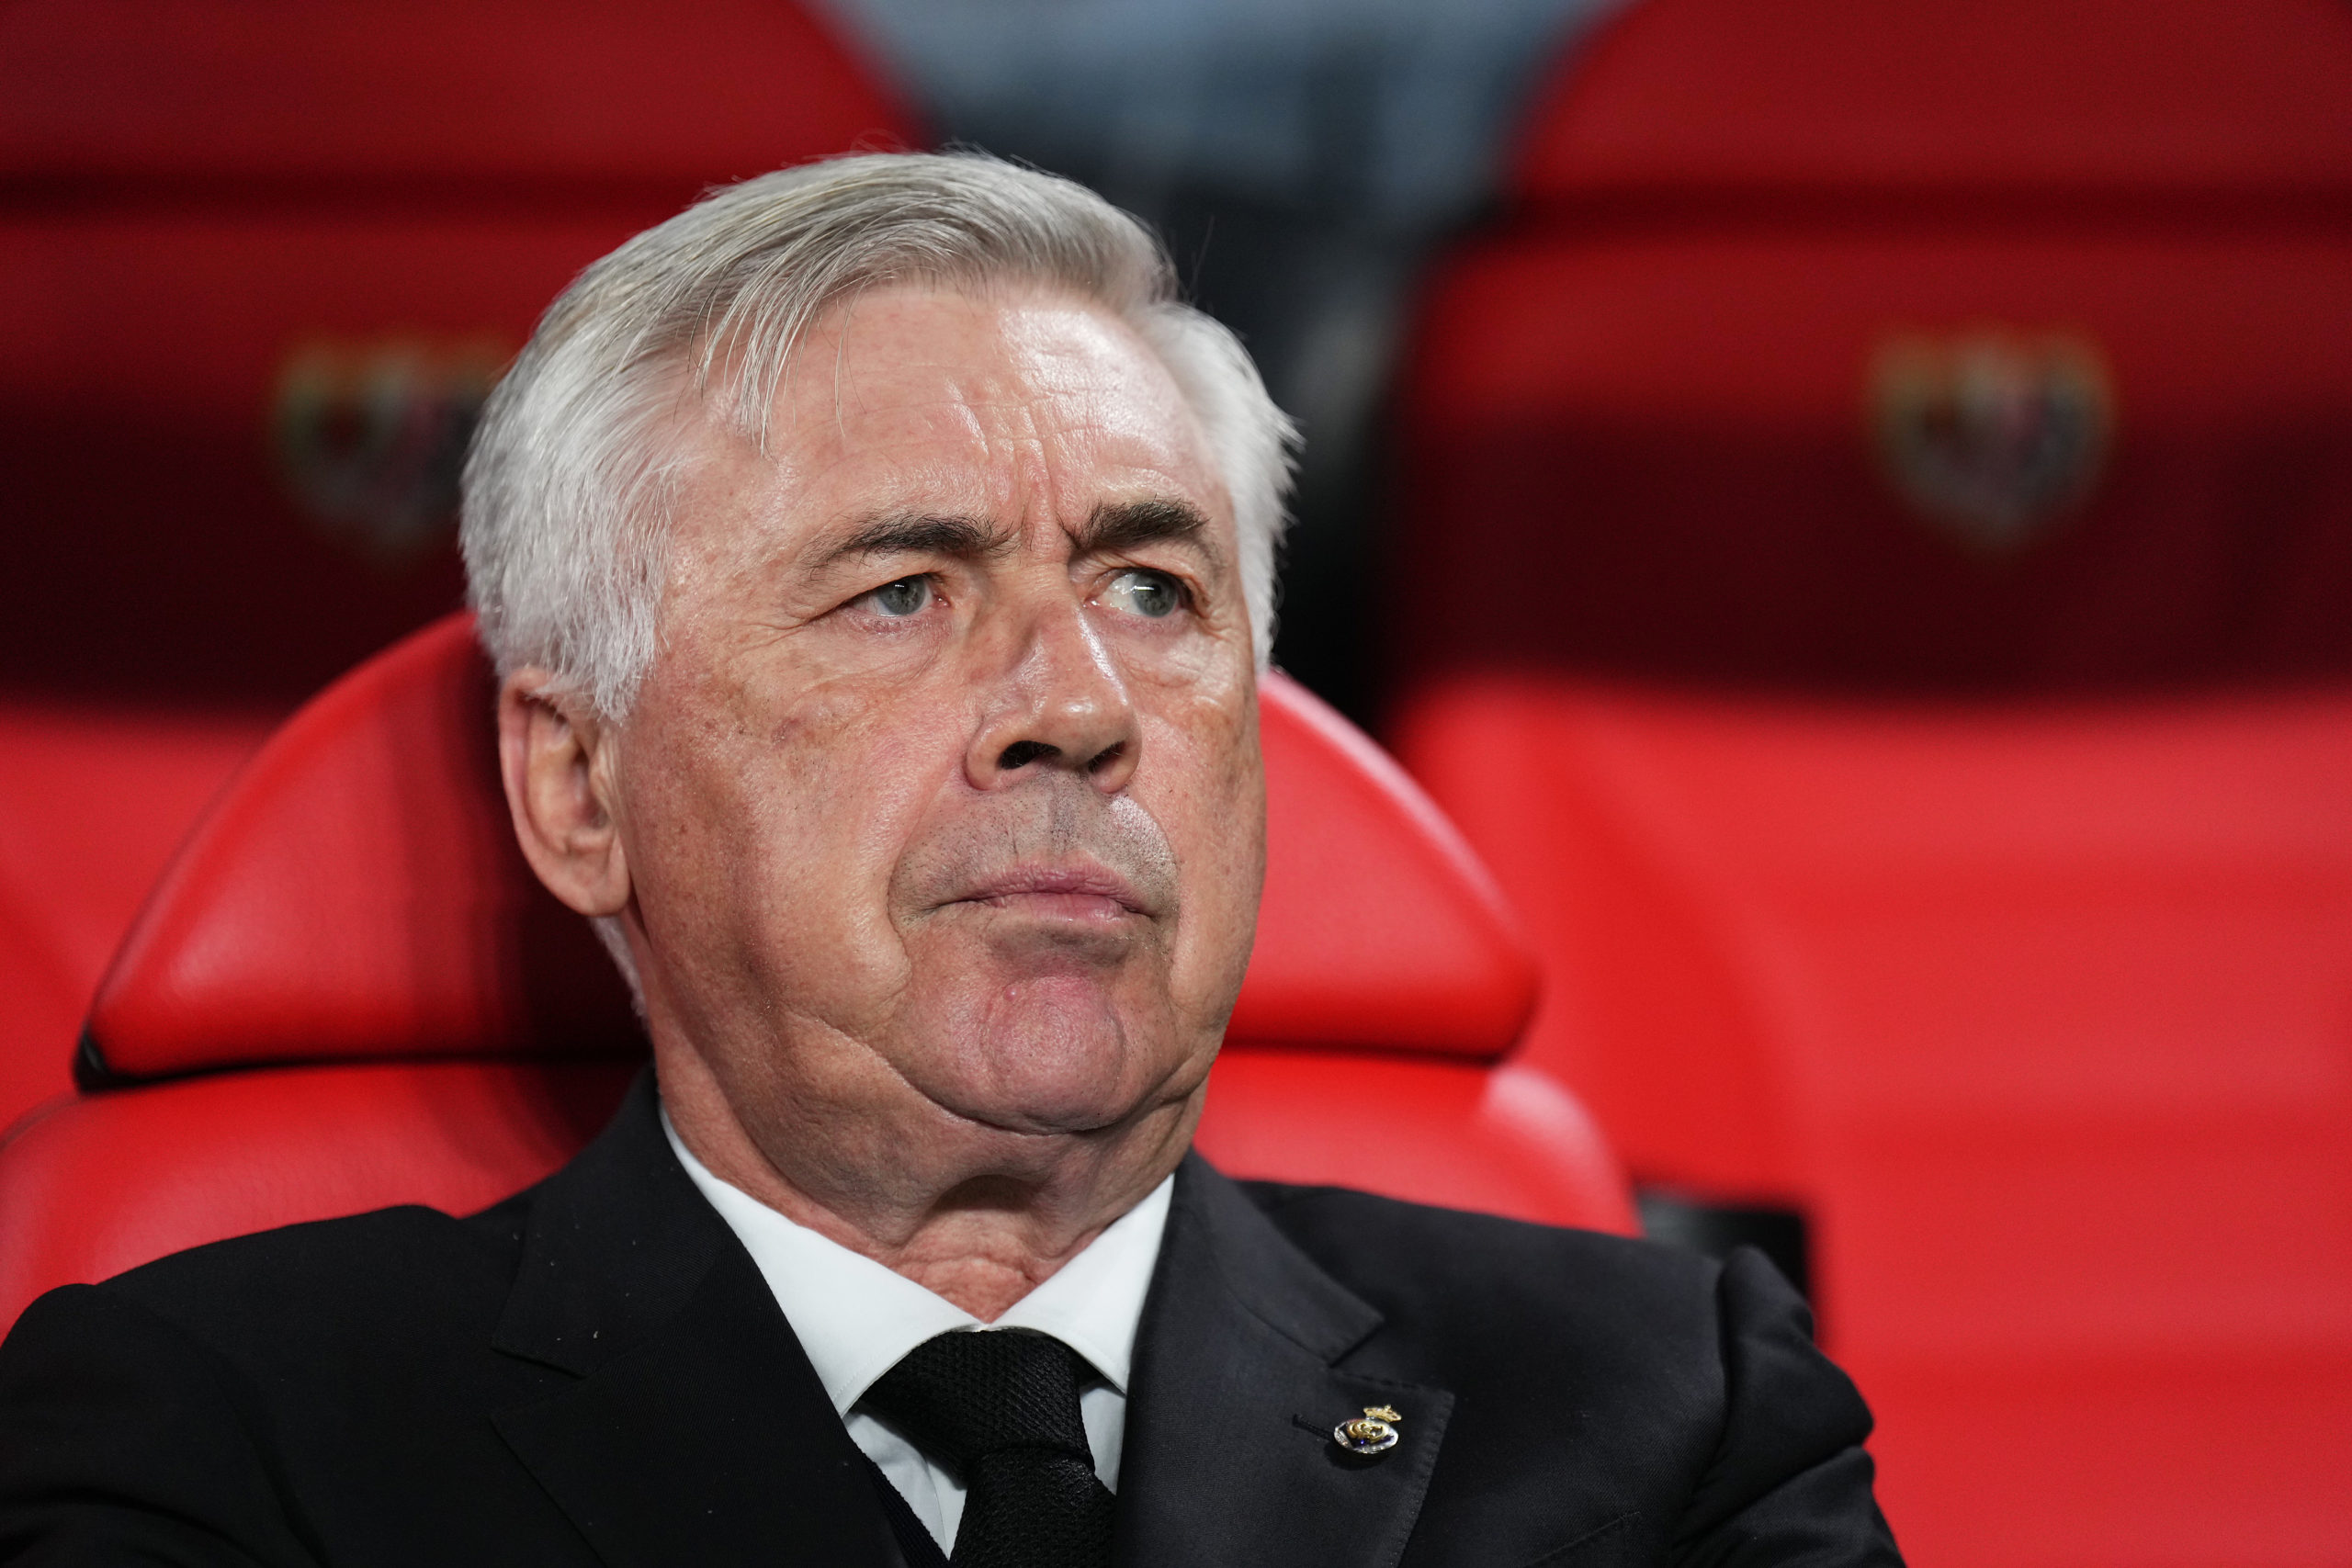 Carlo Ancelotti will take over Brazil starting from next summer. His spell will begin with the 2024 Copa America after the end of next season.